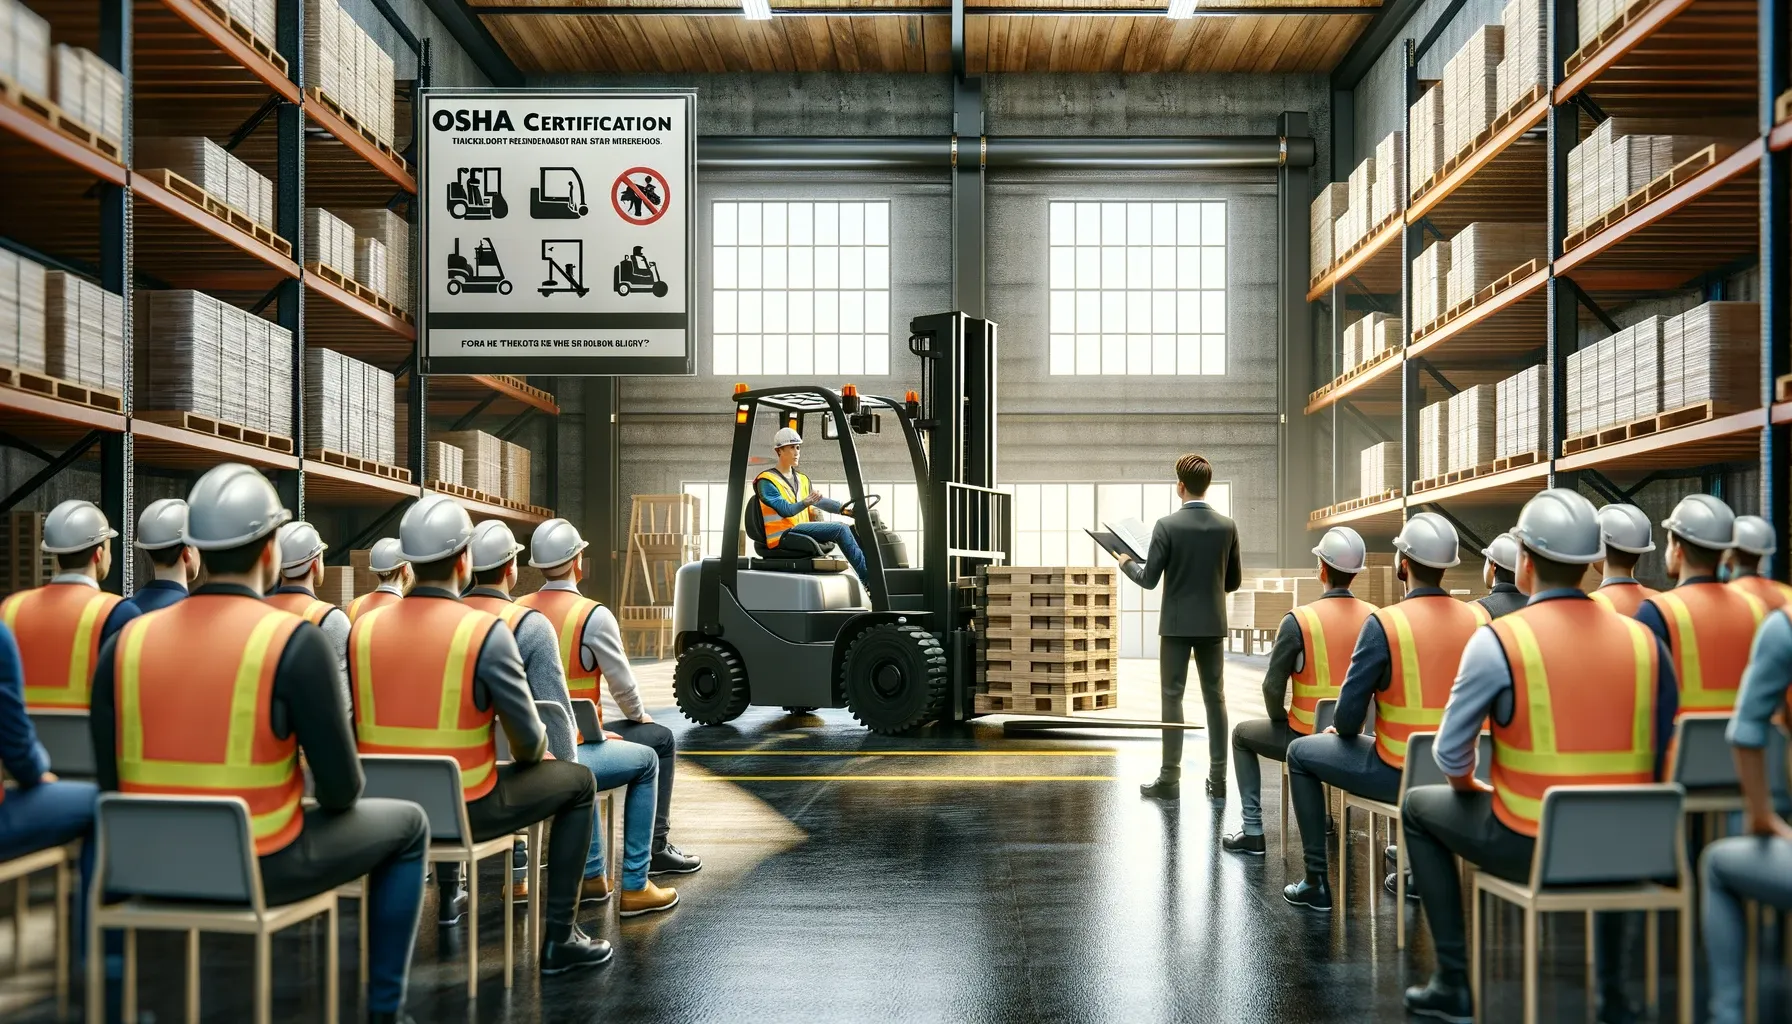 Forklift OSHA Certification – A Key Investment in Professional Development and Risk Mitigation